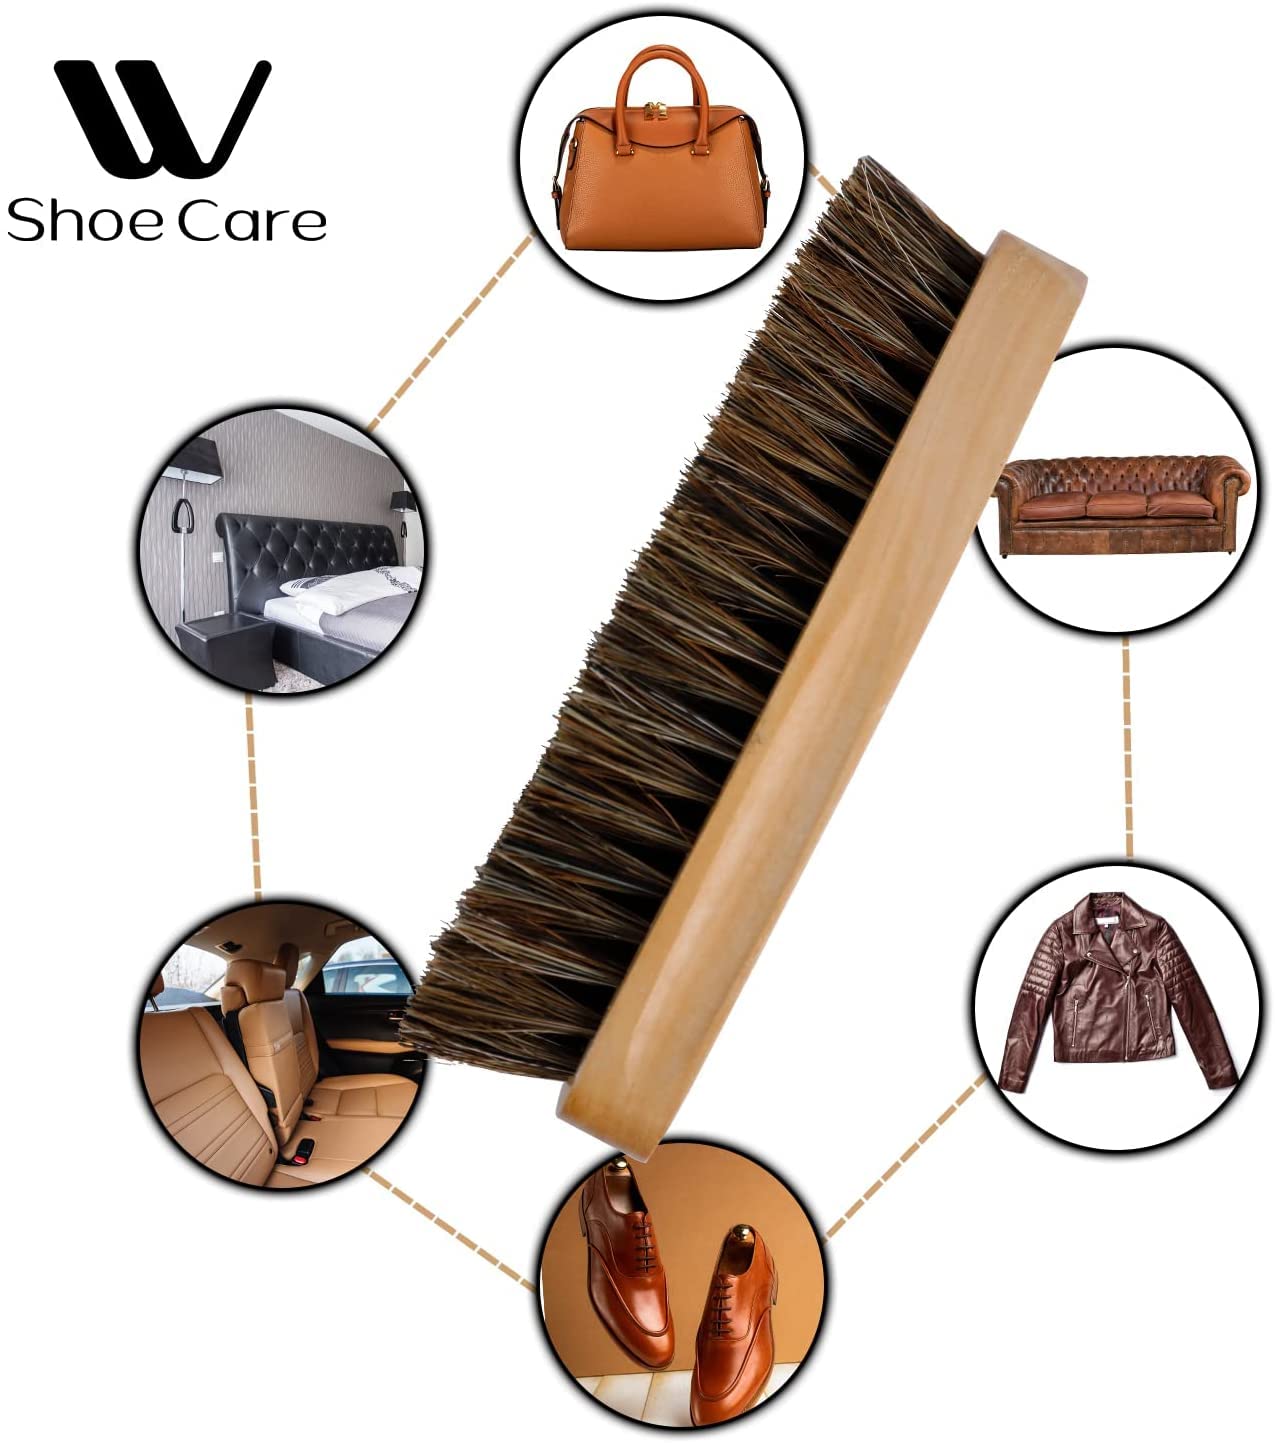 WBM Care Shoe Brush, Protects Leather from Scuffs and Scratches, Best for All Kind of Leather Surfaces, Shoe Cleaner, Horsehair Boot Brush, Pack of 2 (6308A-2PCS)